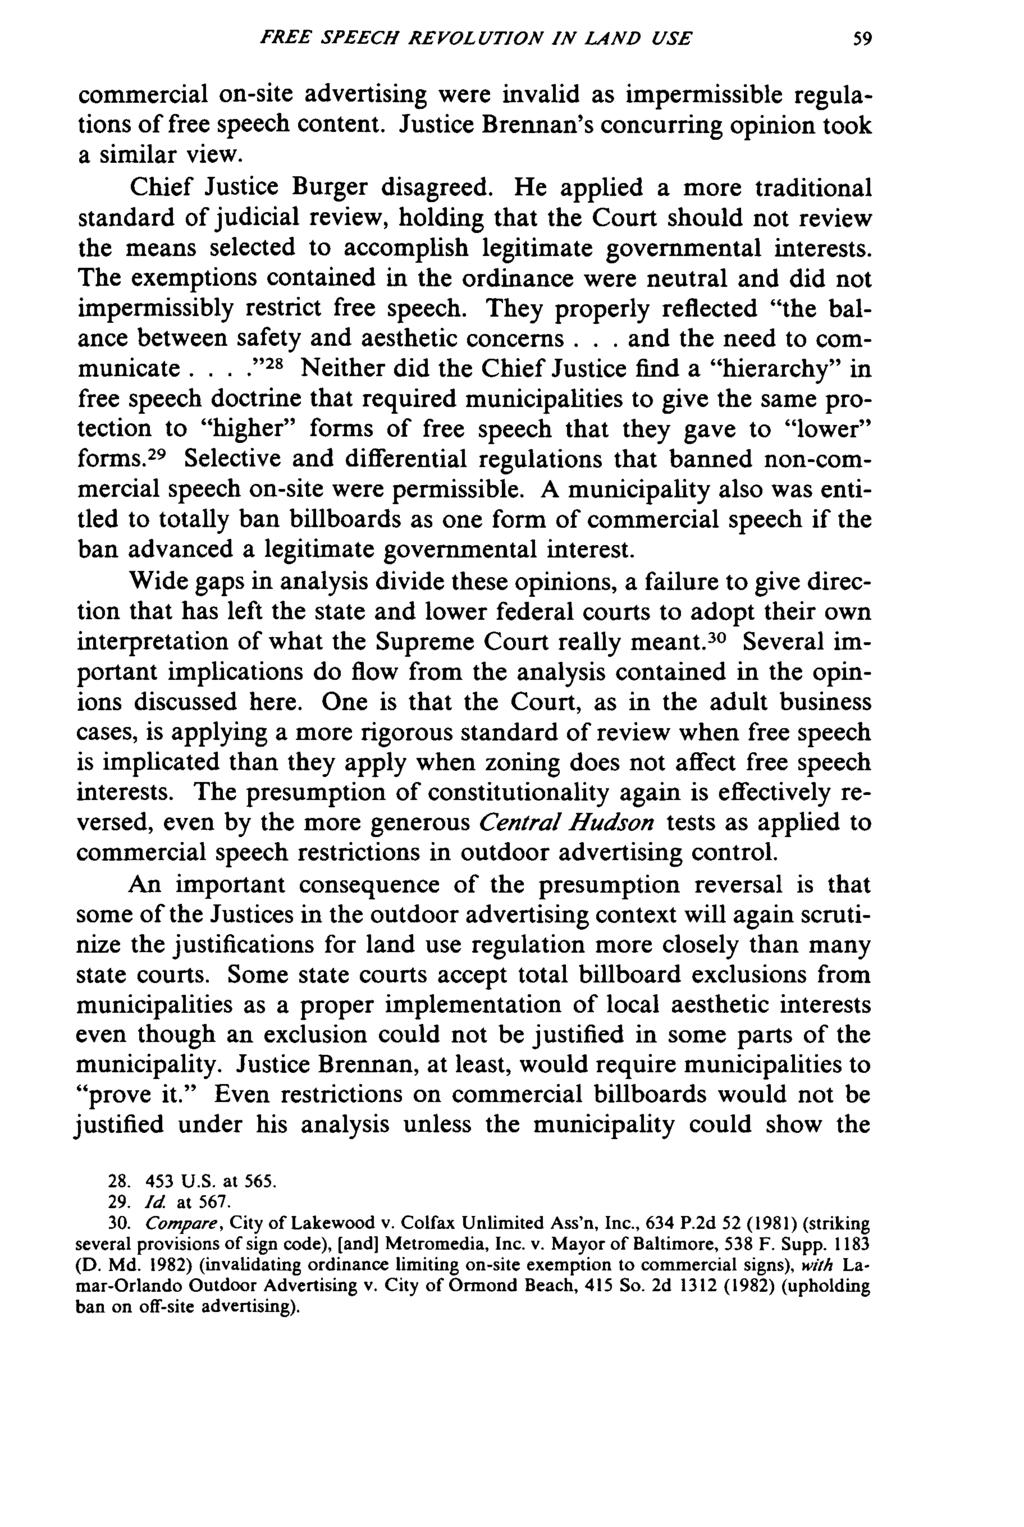 FREE SPEECH REVOLUTION IN LAND USE commercial on-site advertising were invalid as impermissible regulations of free speech content. Justice Brennan's concurring opinion took a similar view.